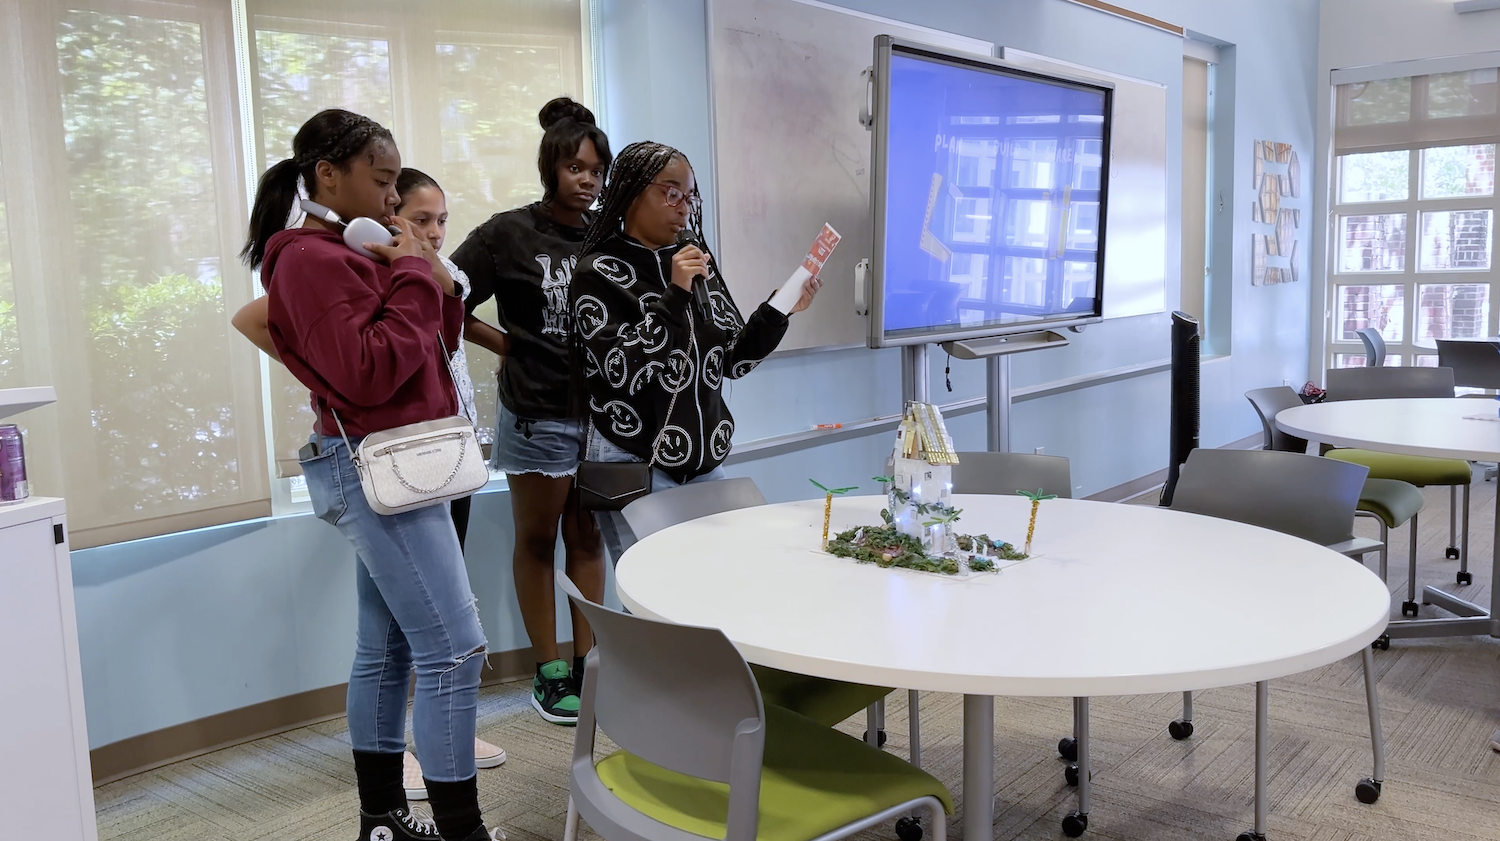  Charlotte-Mecklenburg Schools female students explore their opportunities in STEM industries.